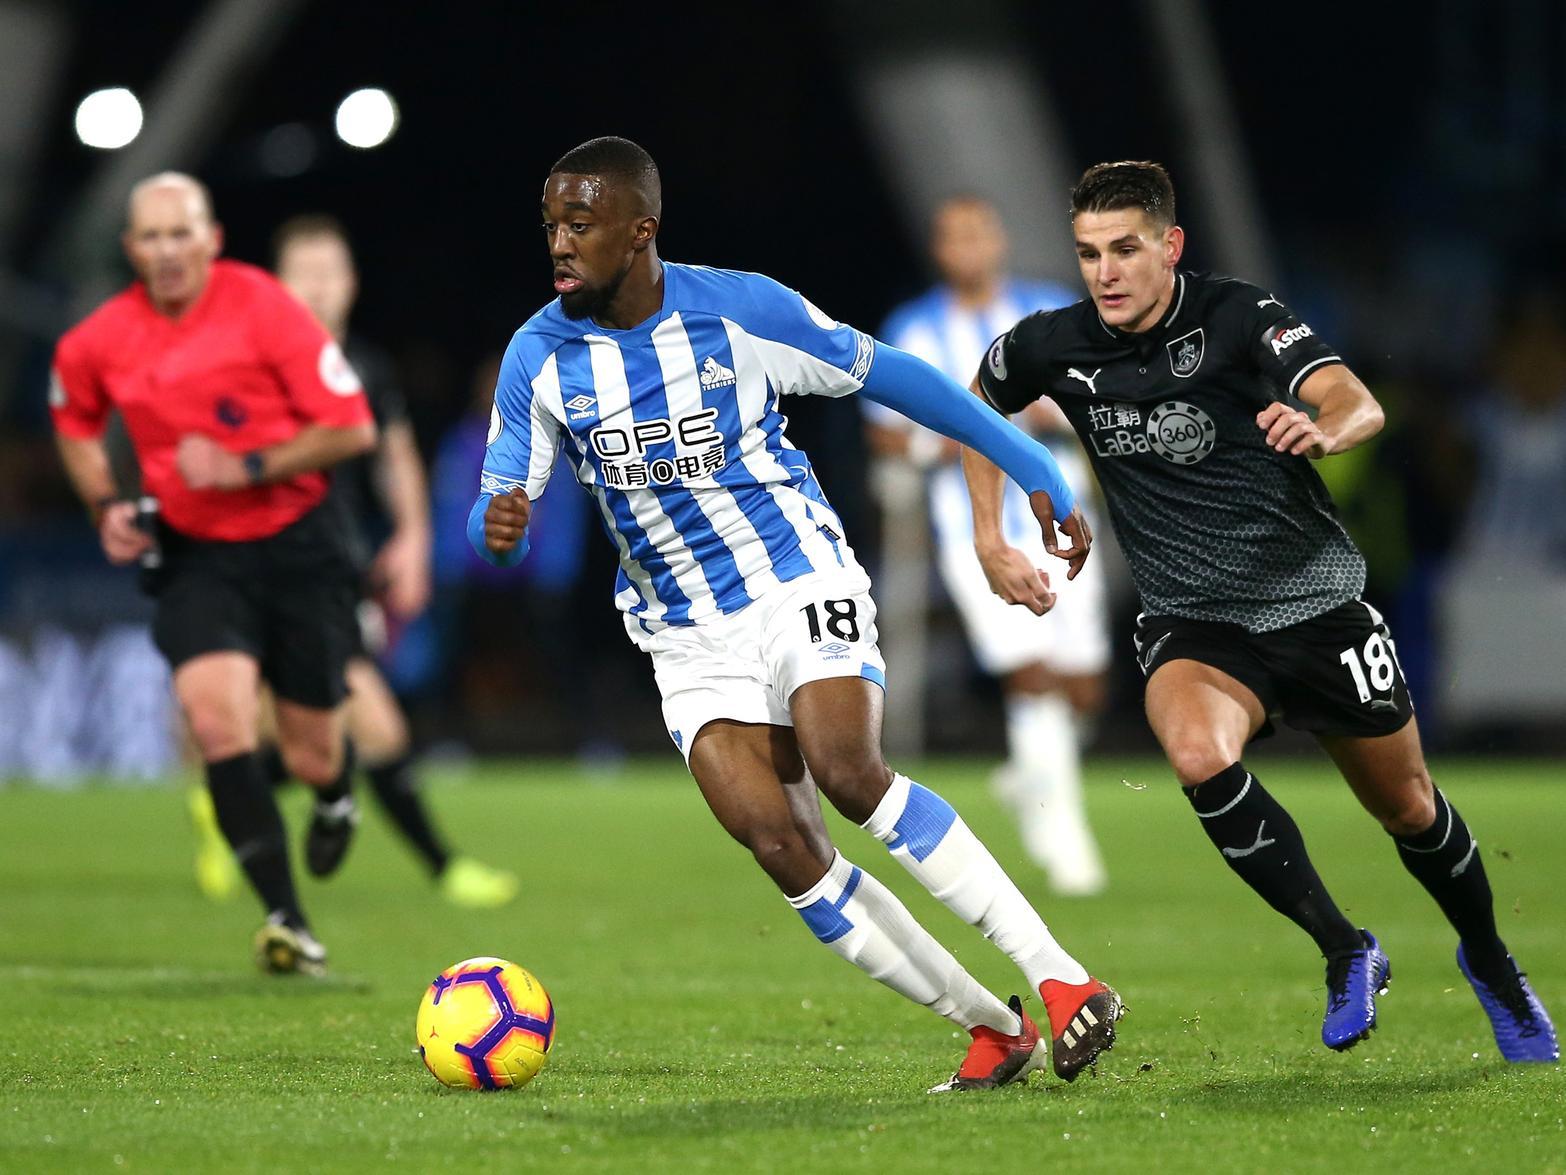 Fulham and Bournemouth are understood to be battling it out for Huddersfield Town forward Isaac Mbenza. He's yet to find his feet in English football since arriving from Montpellier in 2018. (L'Equipe)